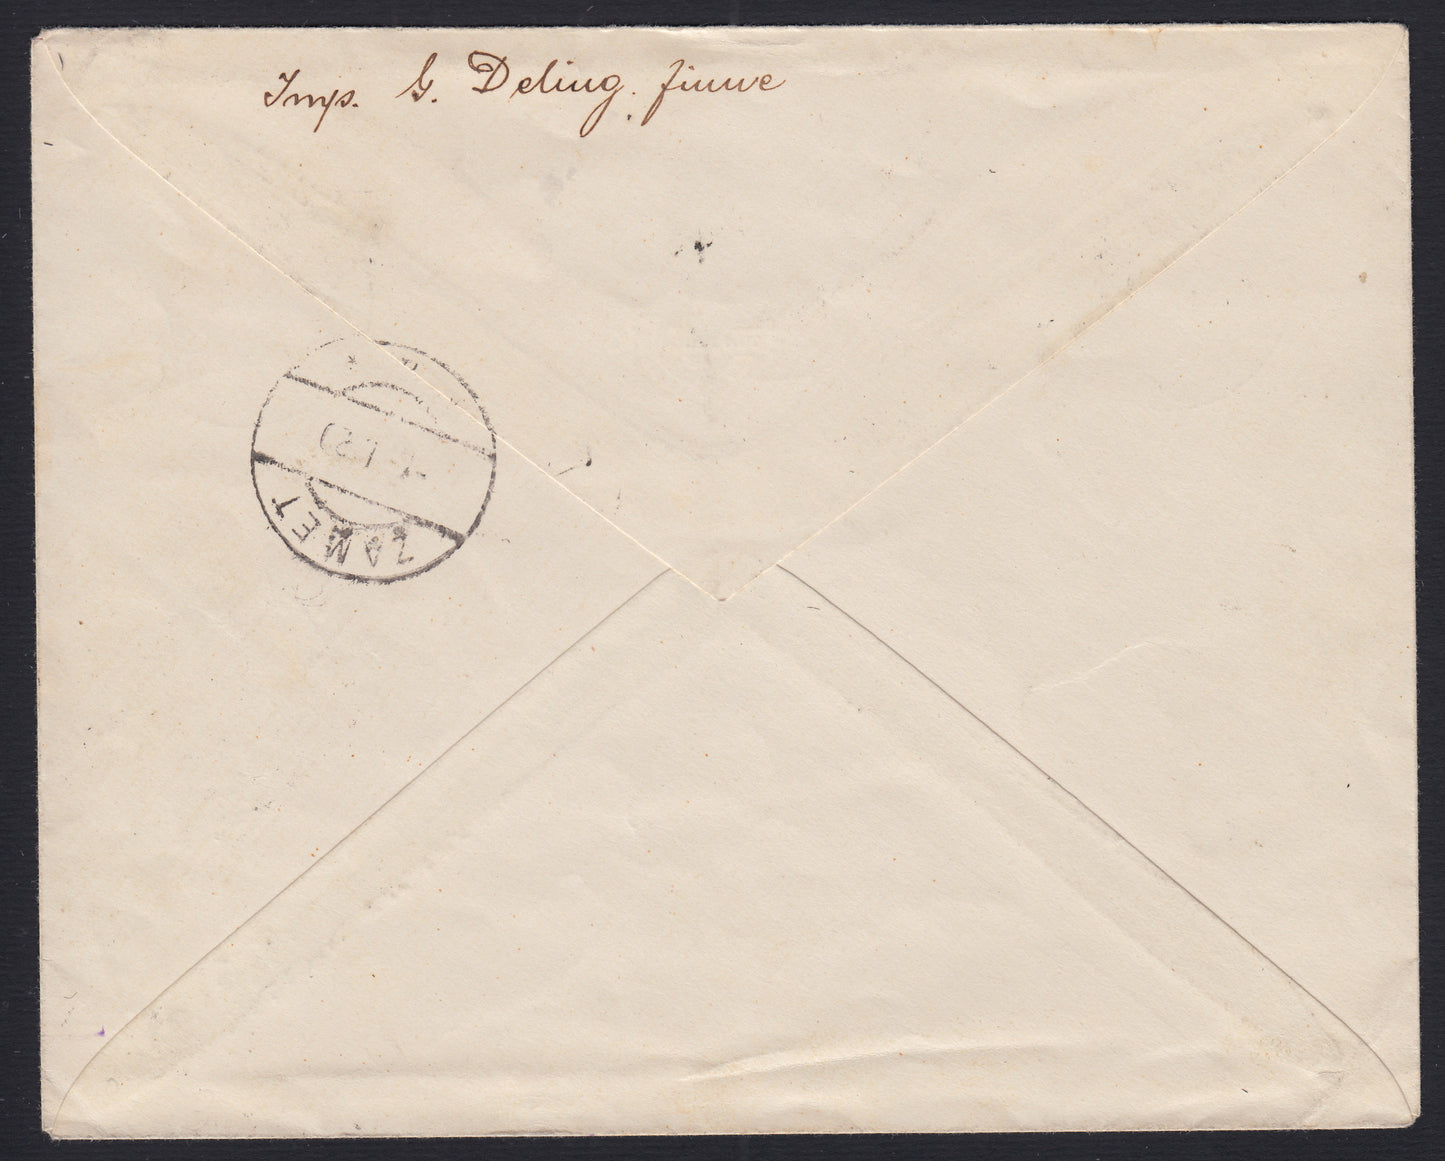 266 - 1920 - Letter sent from Fiume to Zamat 4/1/1920 franked with 55 on 1 cor. + 55 on 3 cor. + 55 on 10 cor. Posta Fiume, the first has an oblique overprint (C83aaa + C85 + D87).